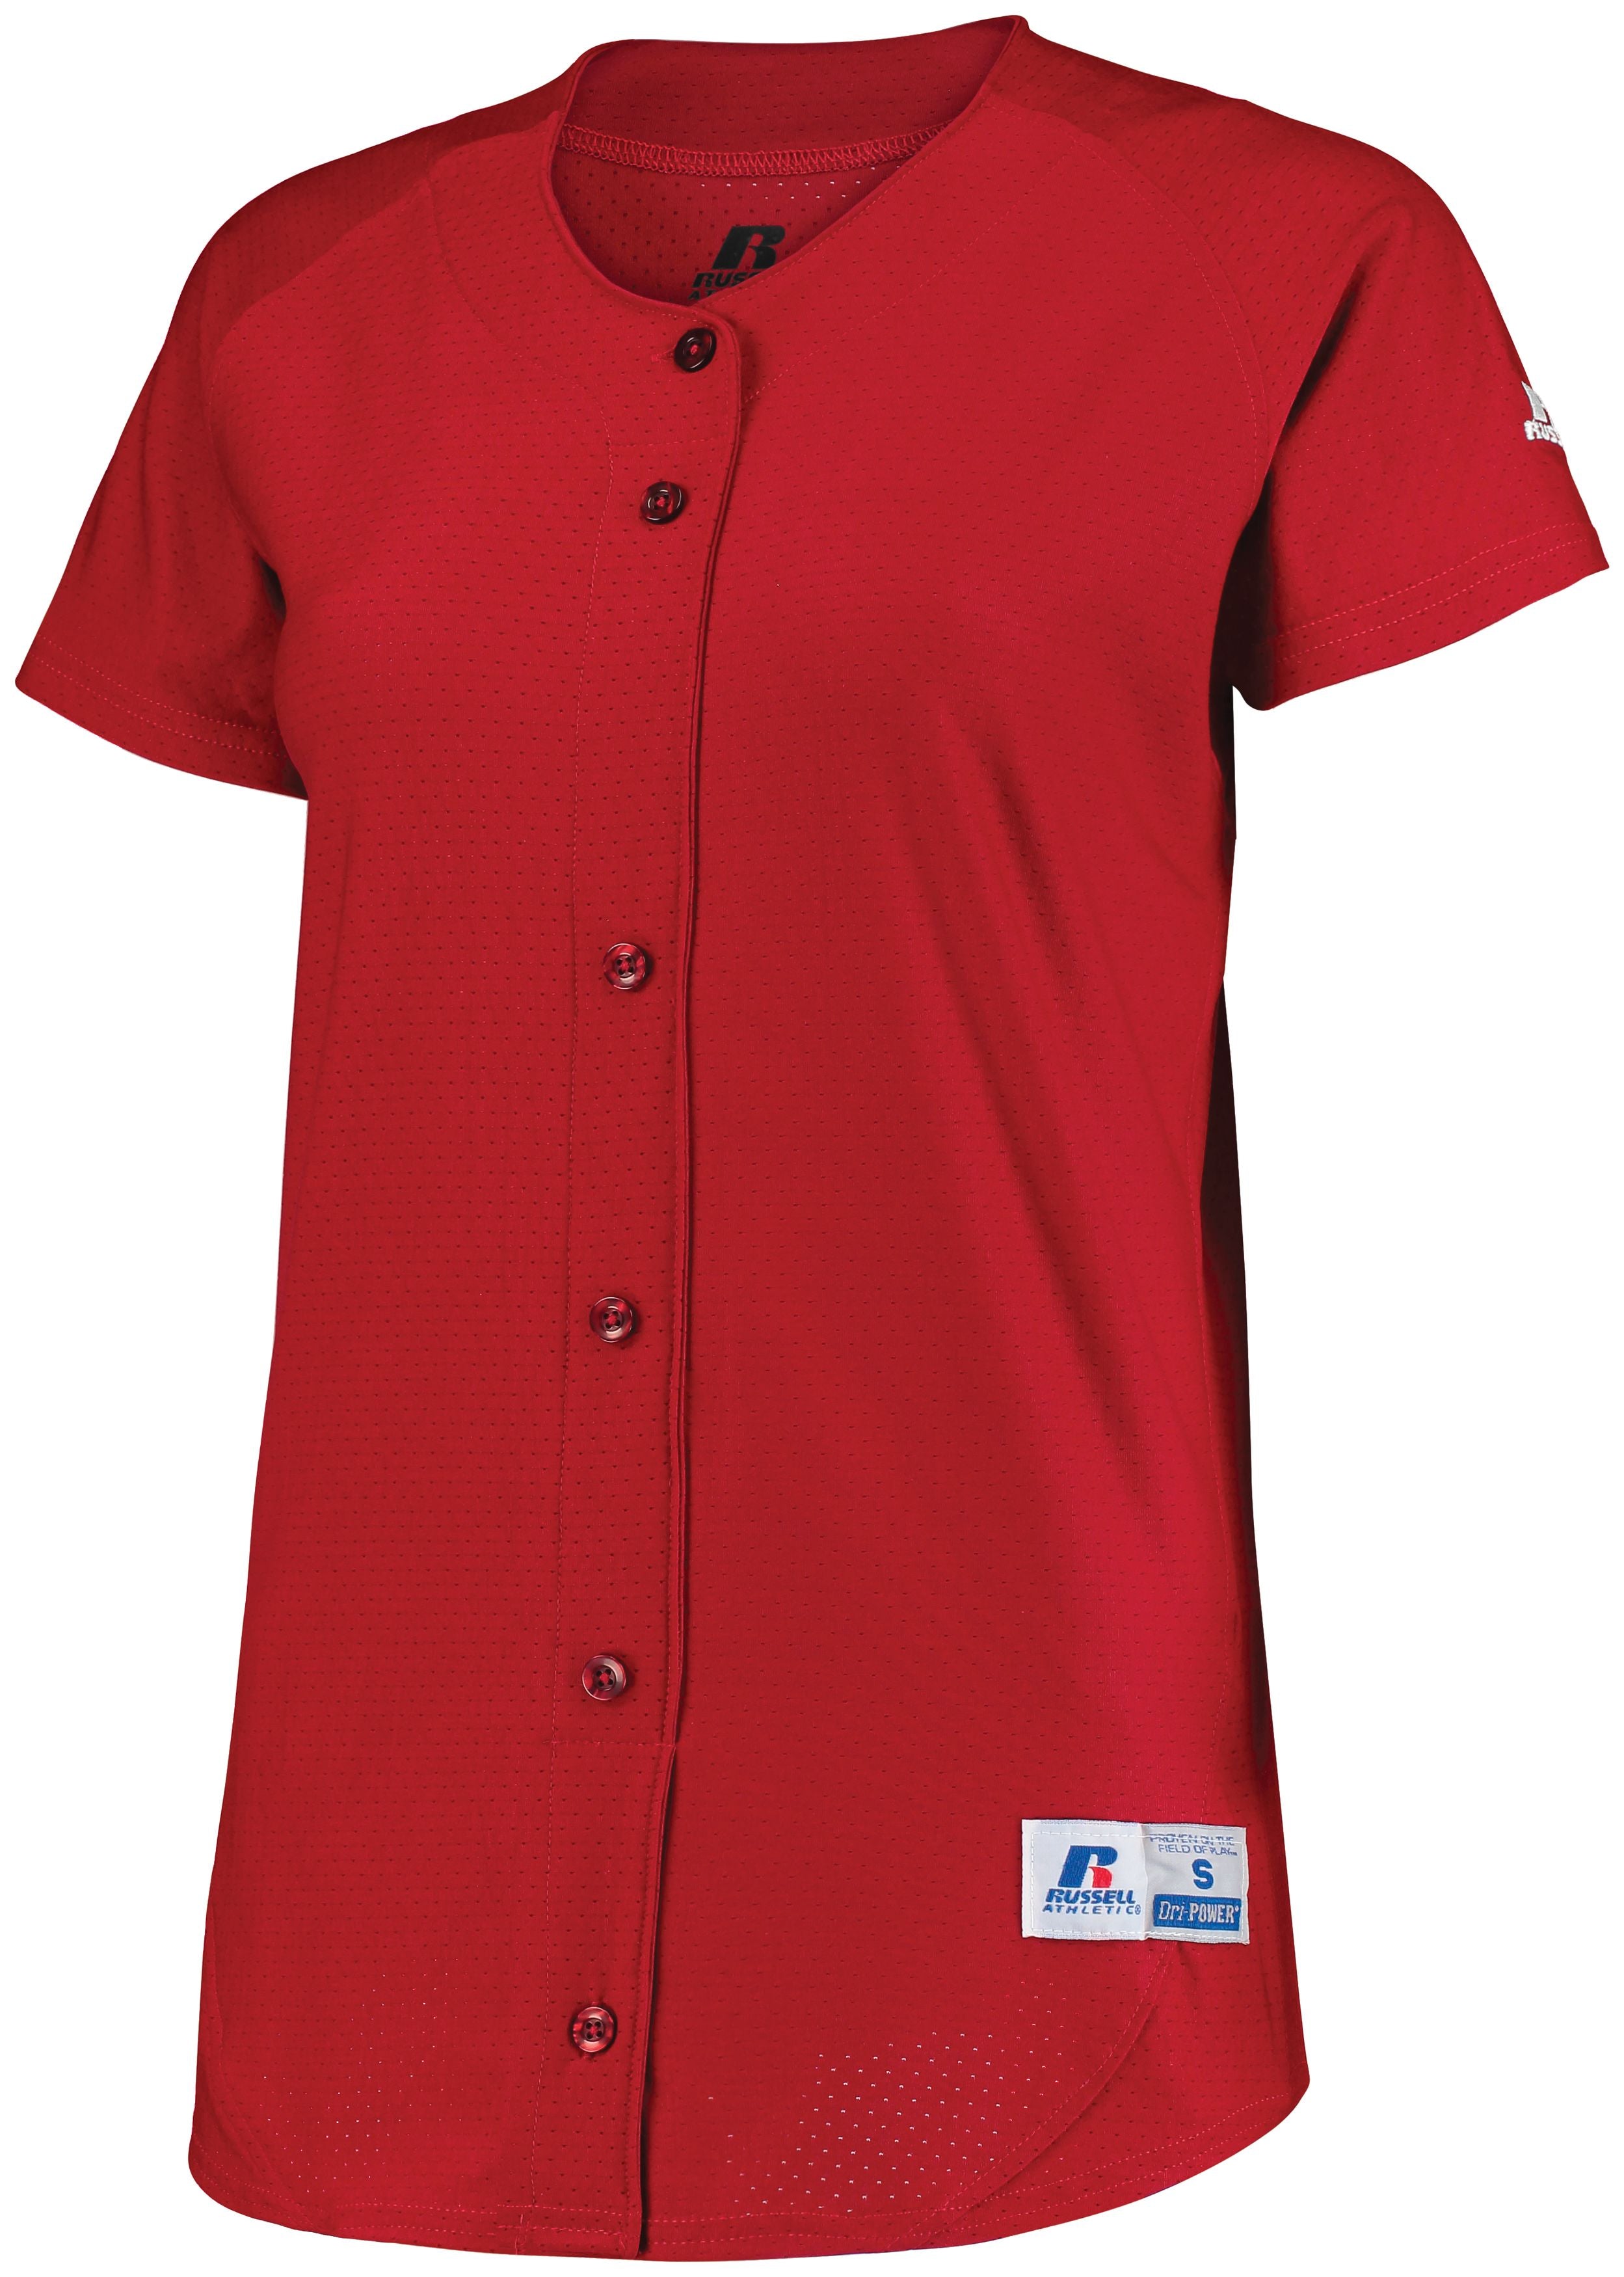 Russell Athletic Ladies Stretch Faux Button Jersey in True Red  -Part of the Ladies, Ladies-Jersey, Softball, Russell-Athletic-Products, Shirts product lines at KanaleyCreations.com